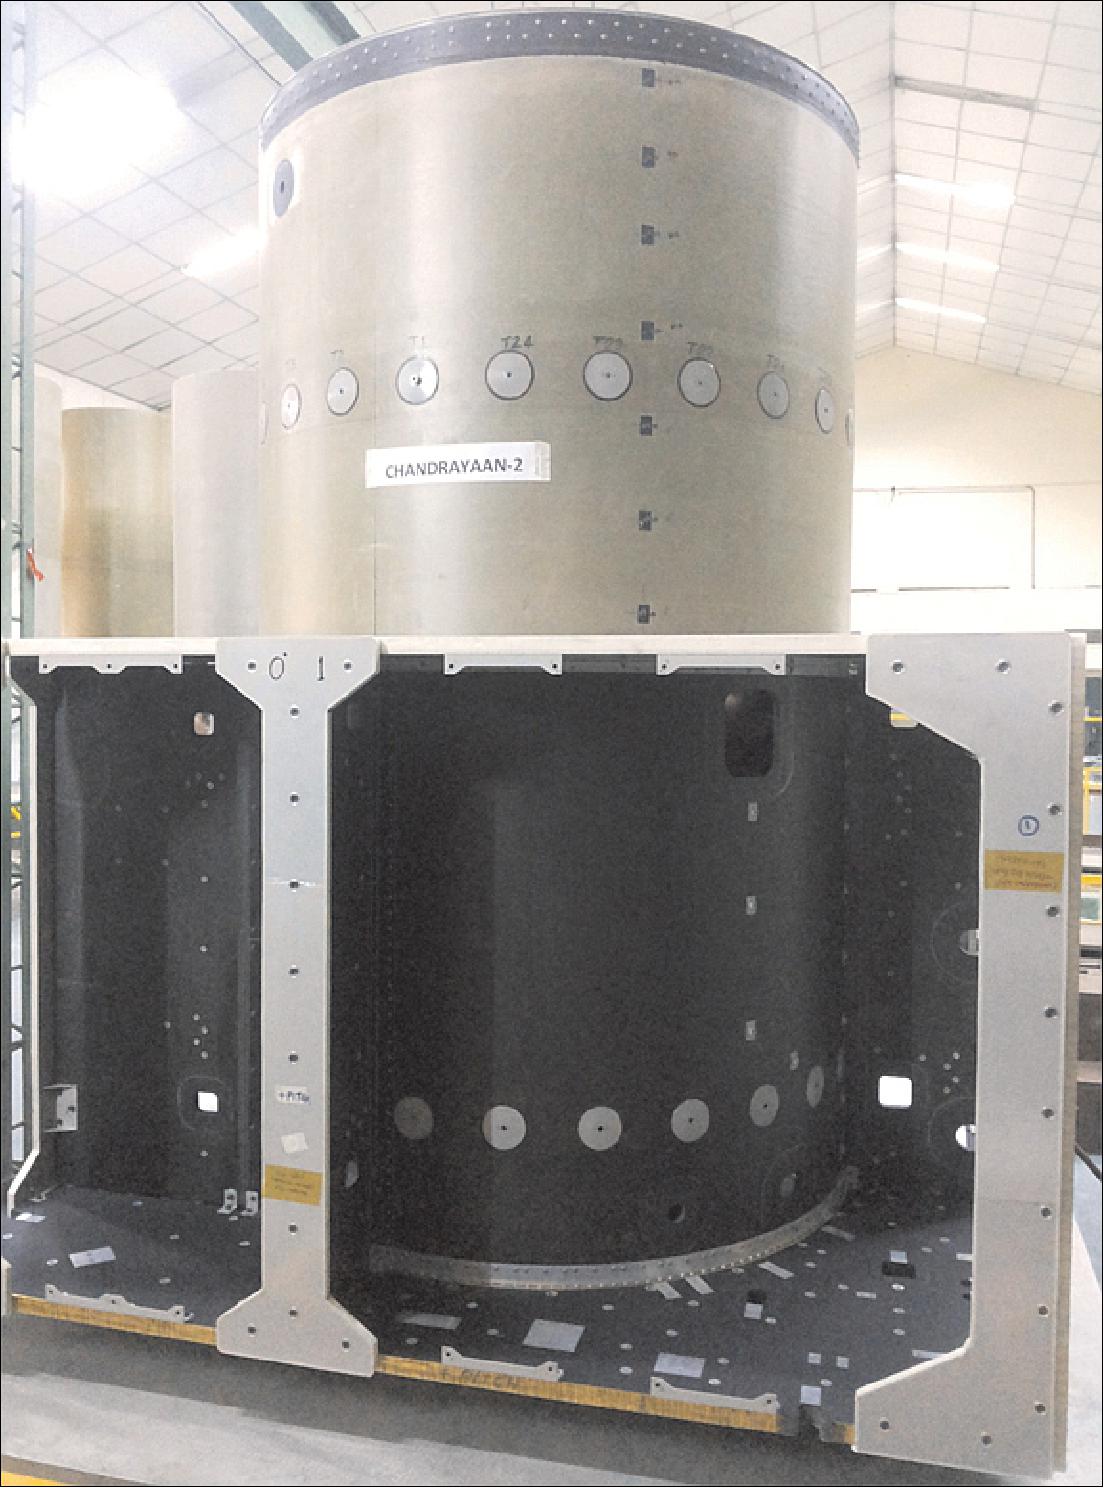 Figure 1: Photo of the 'Orbiter Craft Module Structure' of Chandrayaan-2 delivered by HAL to ISAC (ISRO Satellite Center), image credit: ISRO